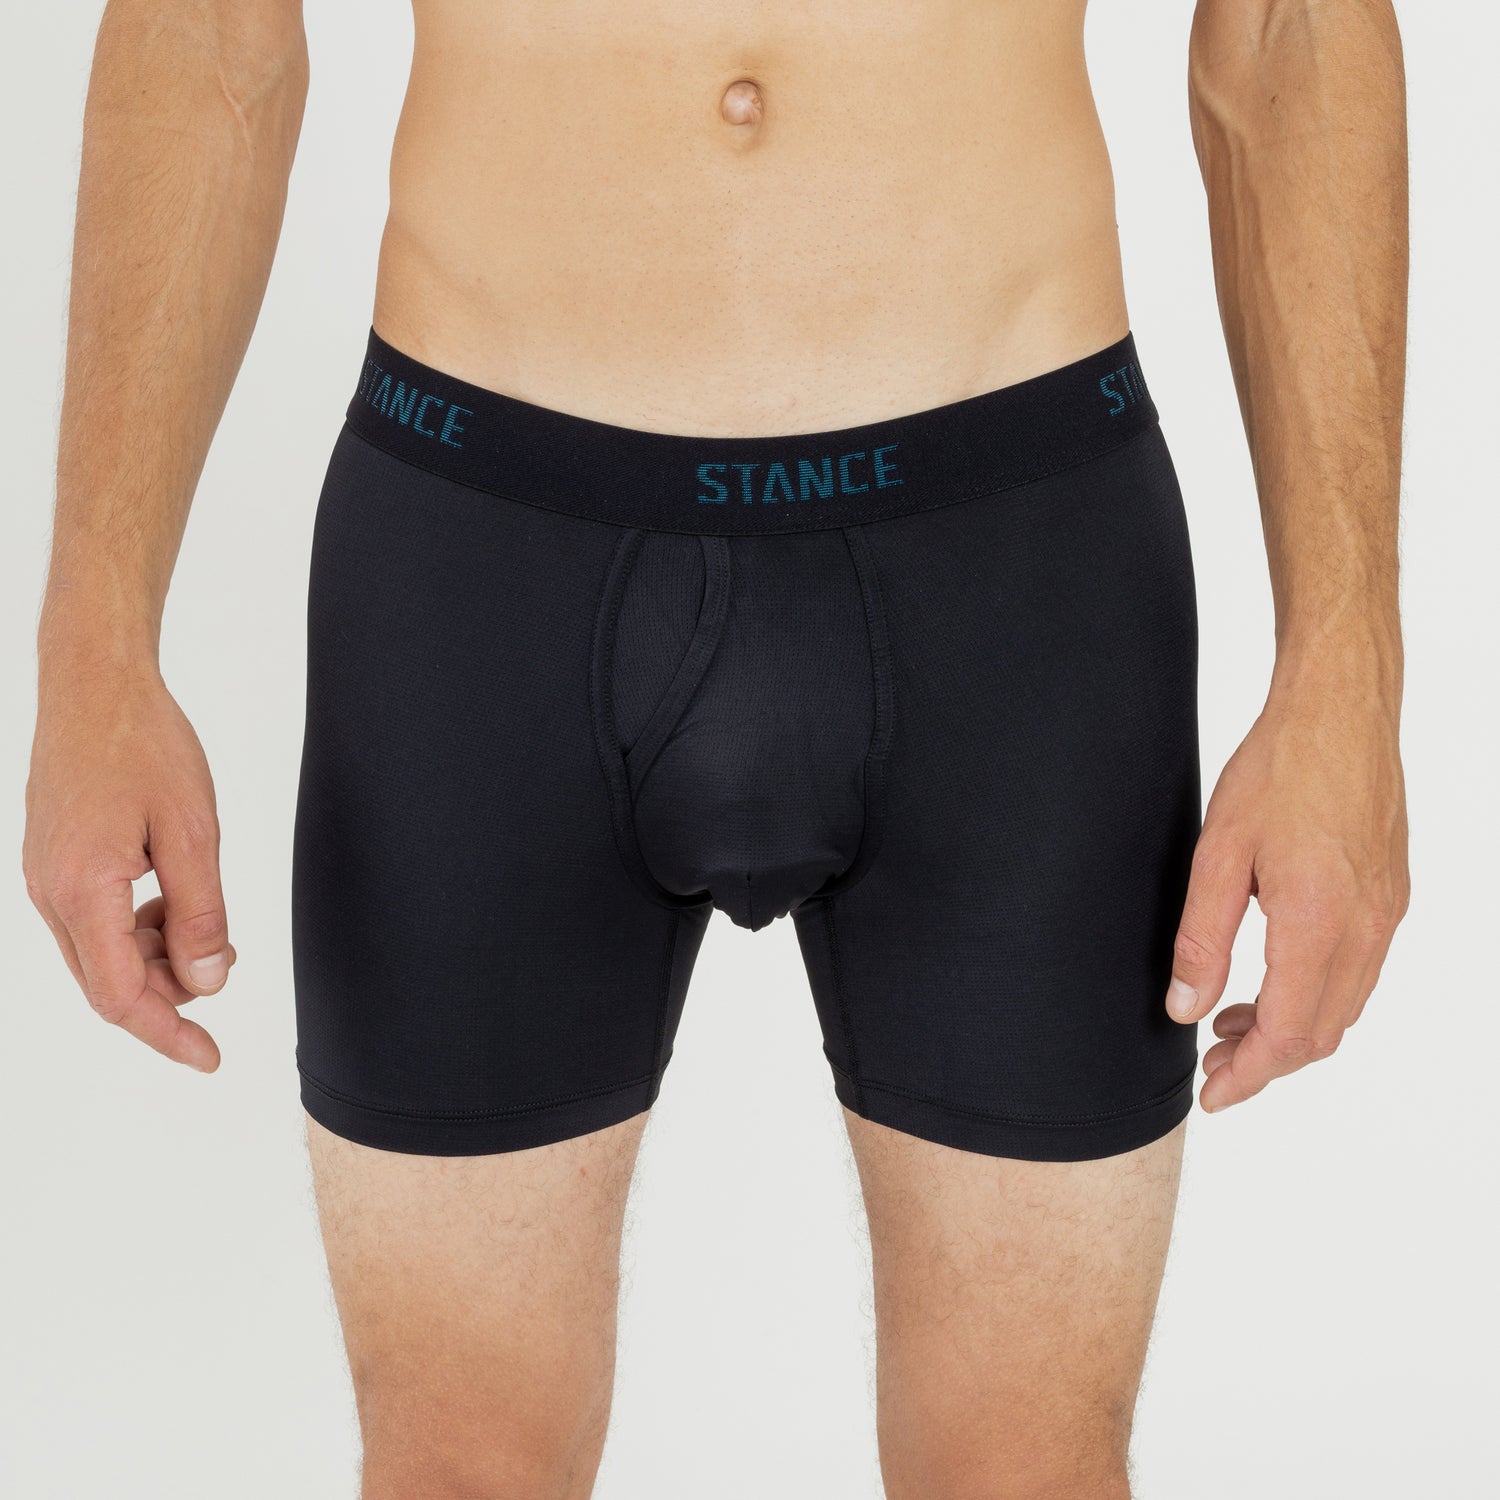 Stance Pure Boxer Brief Wholester Black – Stance Europe